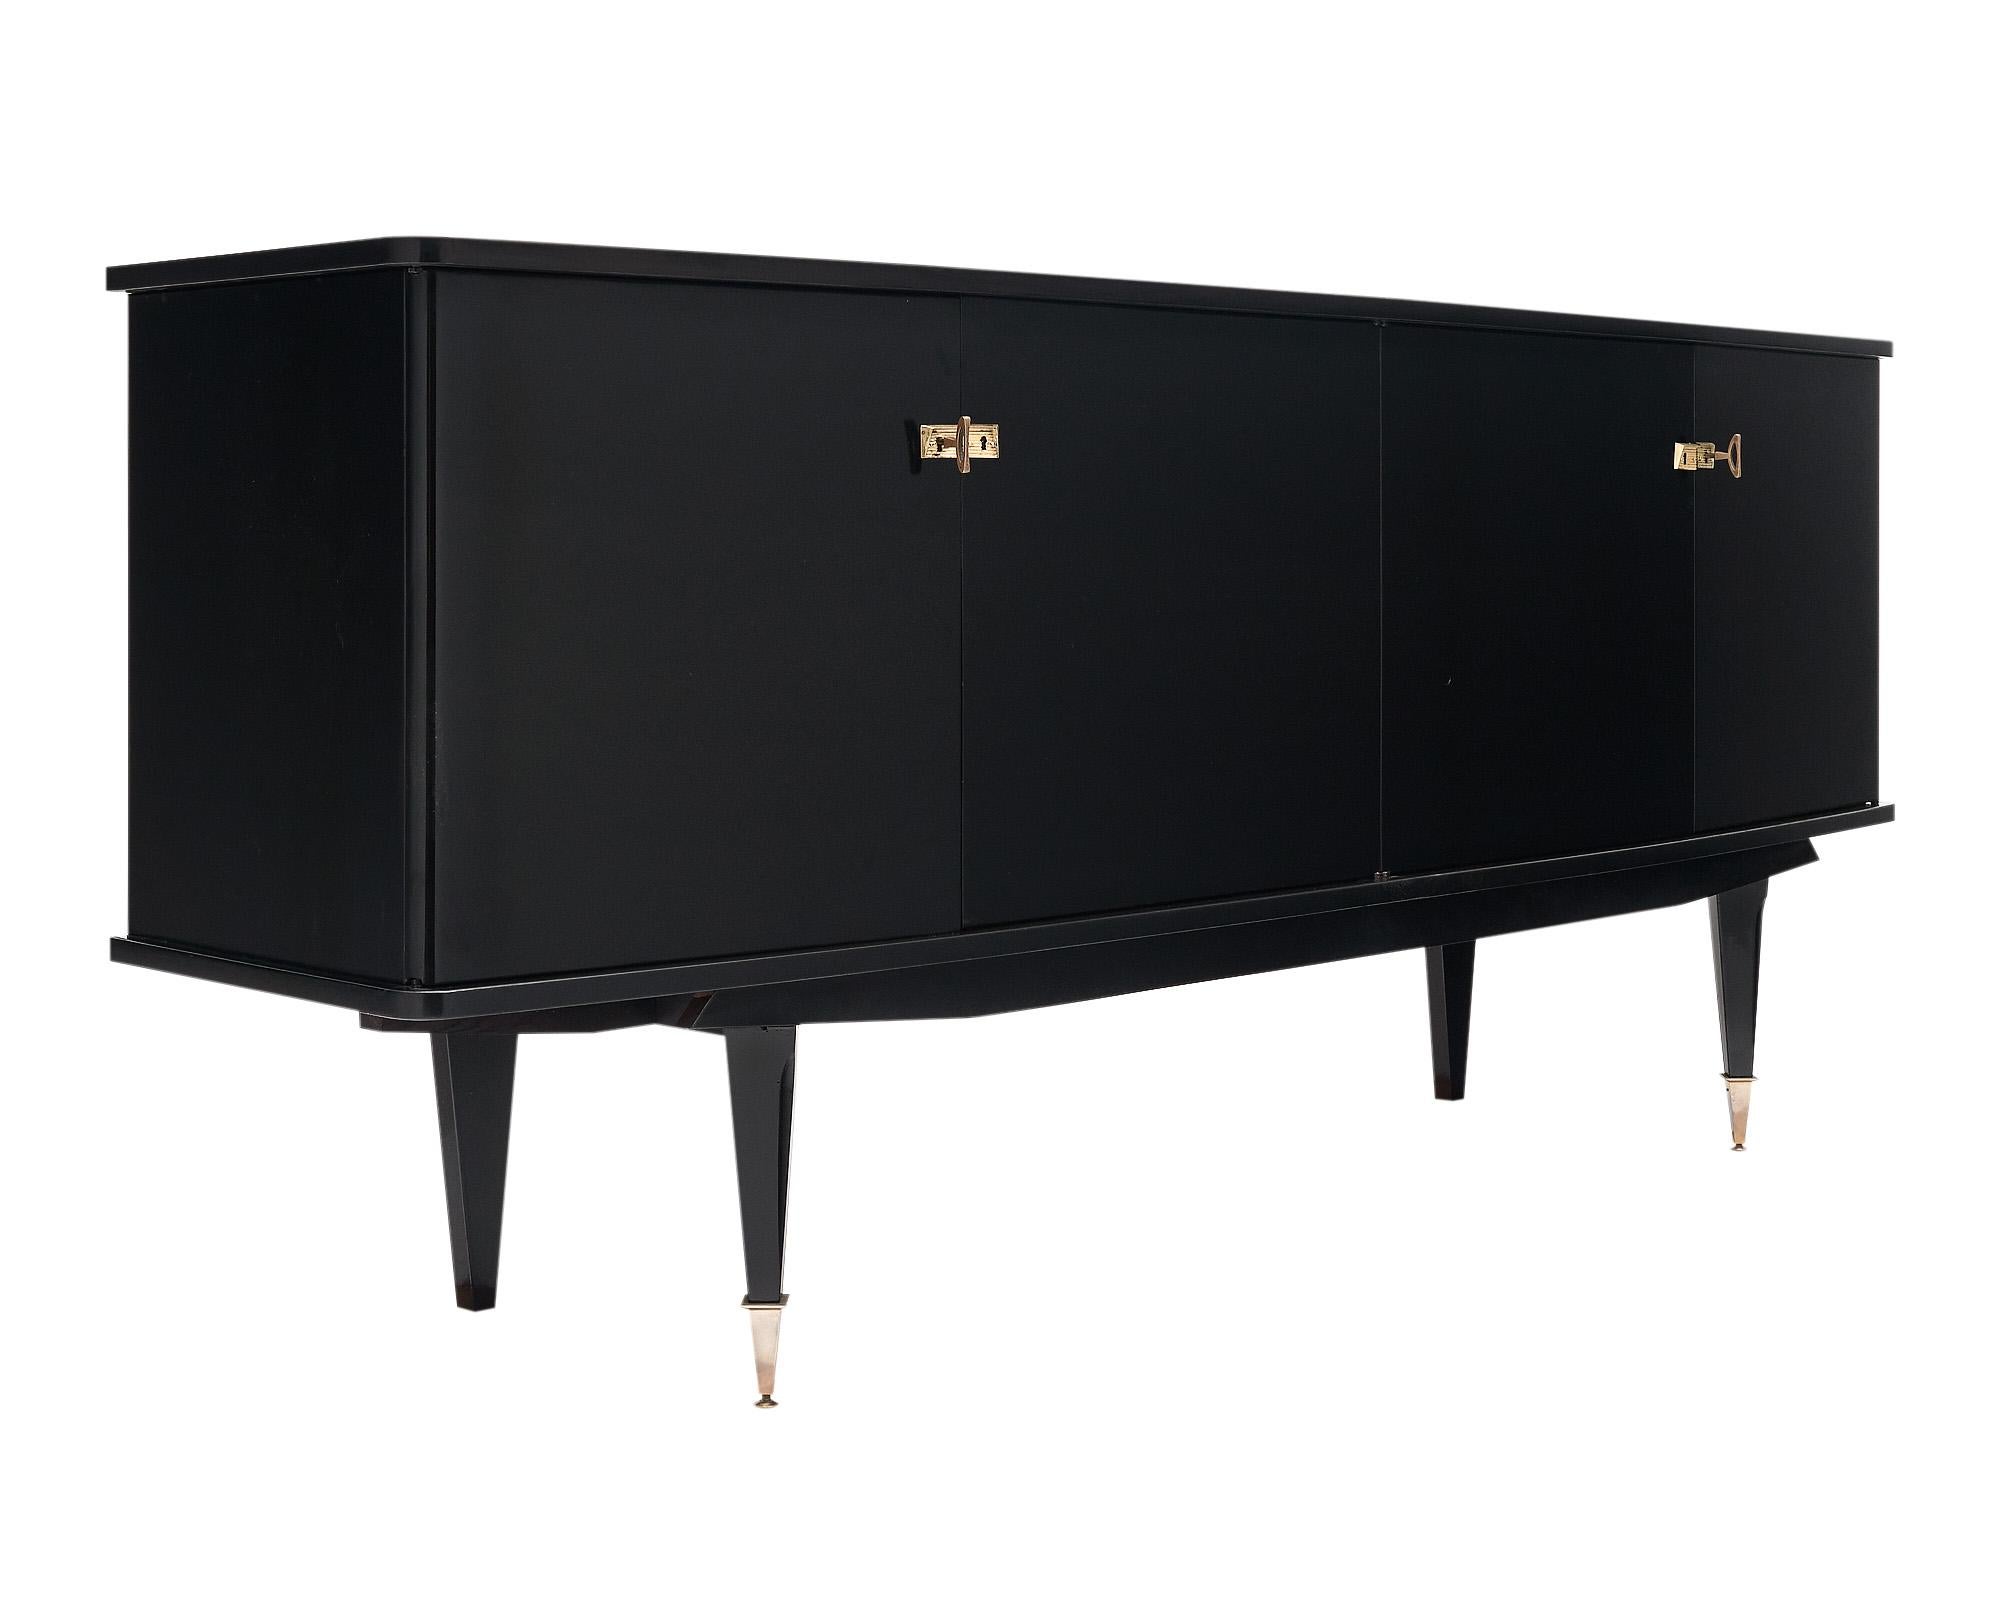 Buffet from France in the mid-century style. This enfilade has been ebonized and finished with a lustrous French polish. There are four doors that open to a lemonwood interior shelving and 2 glass shelves. It is supported by four tapered legs with